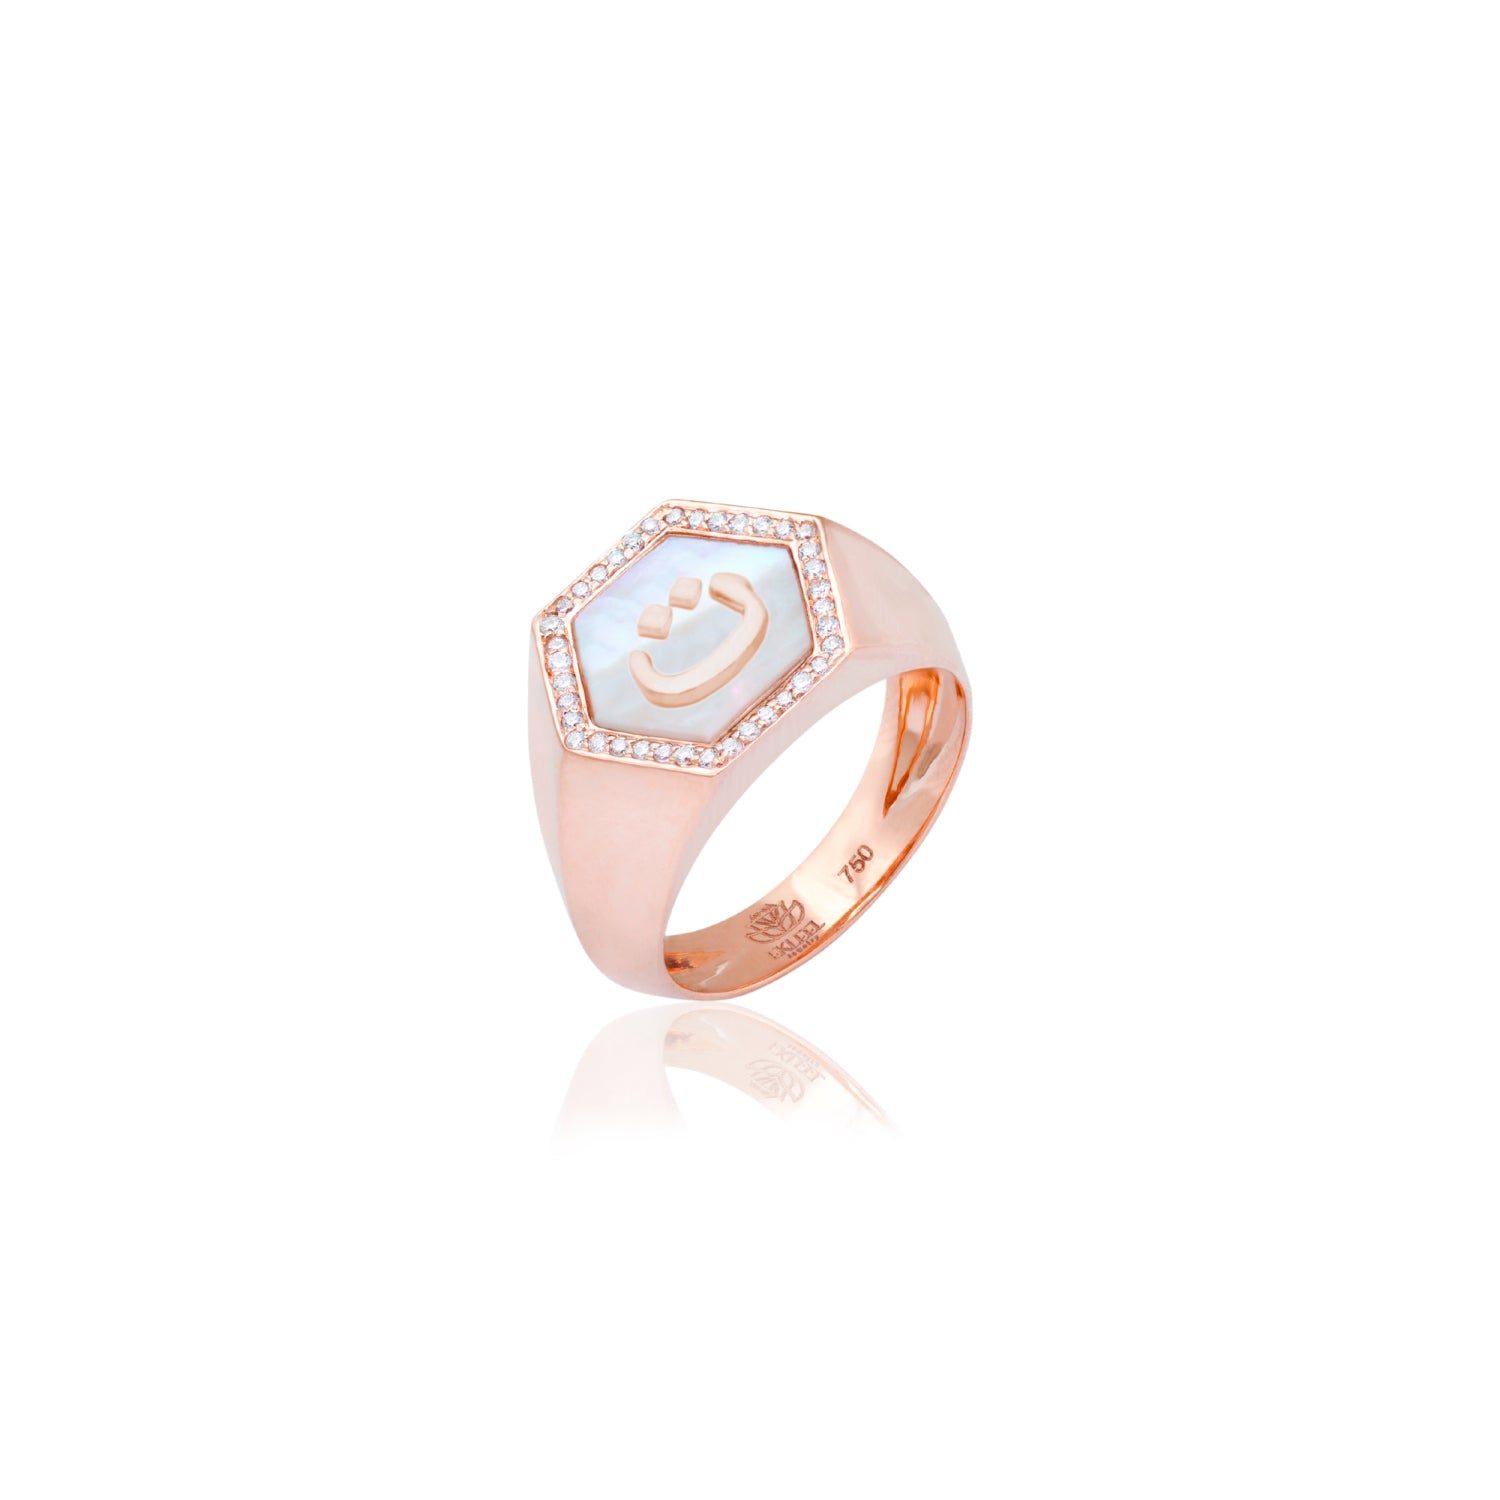 Qamoos 2.0 Letter ت White Mother of Pearl and Diamond Signet Ring in Rose Gold